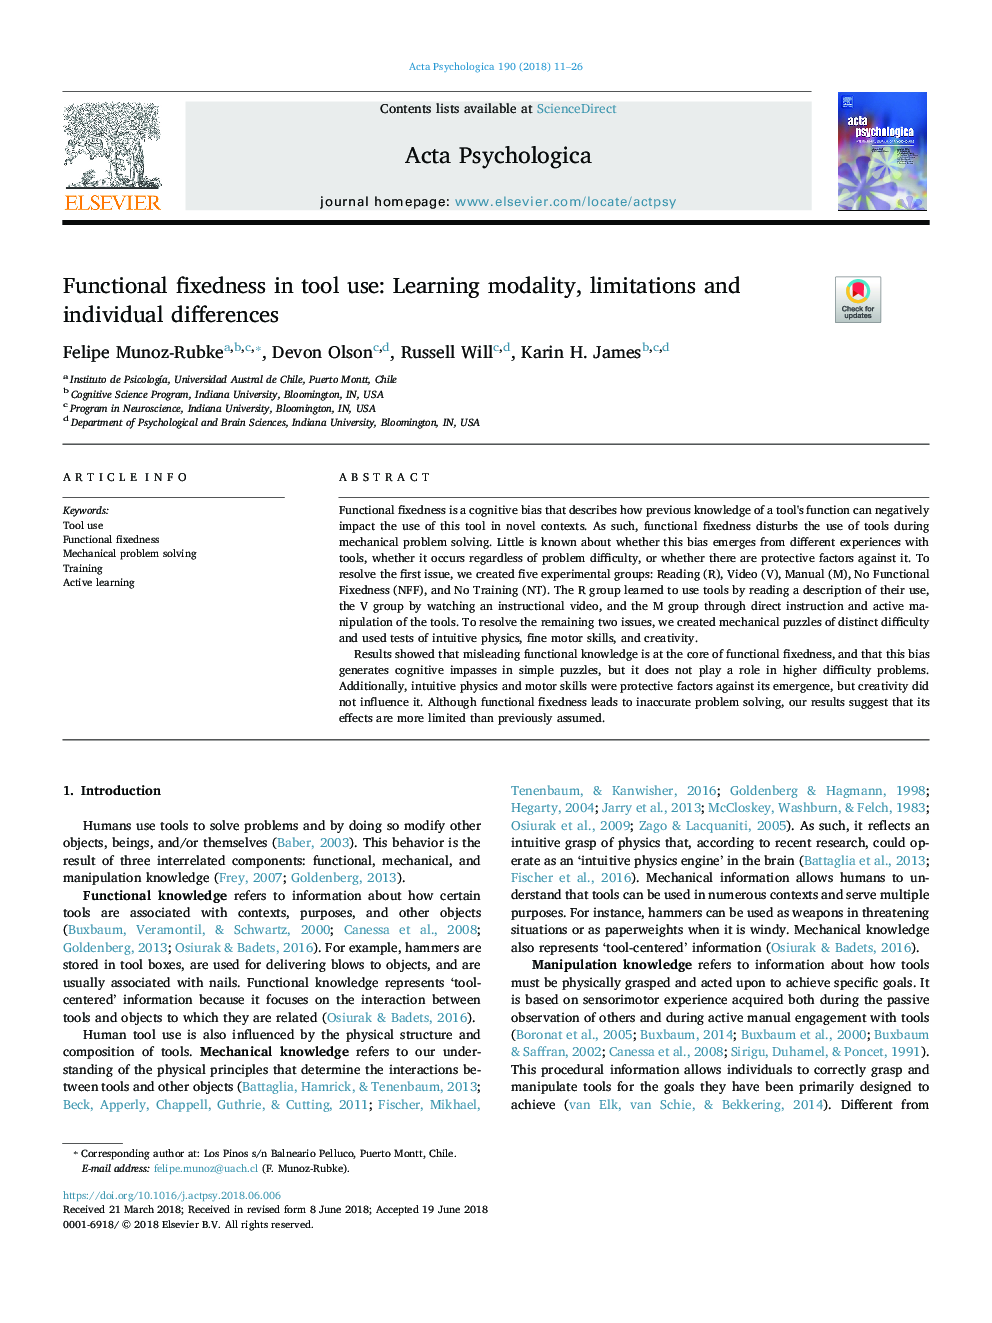 Functional fixedness in tool use: Learning modality, limitations and individual differences